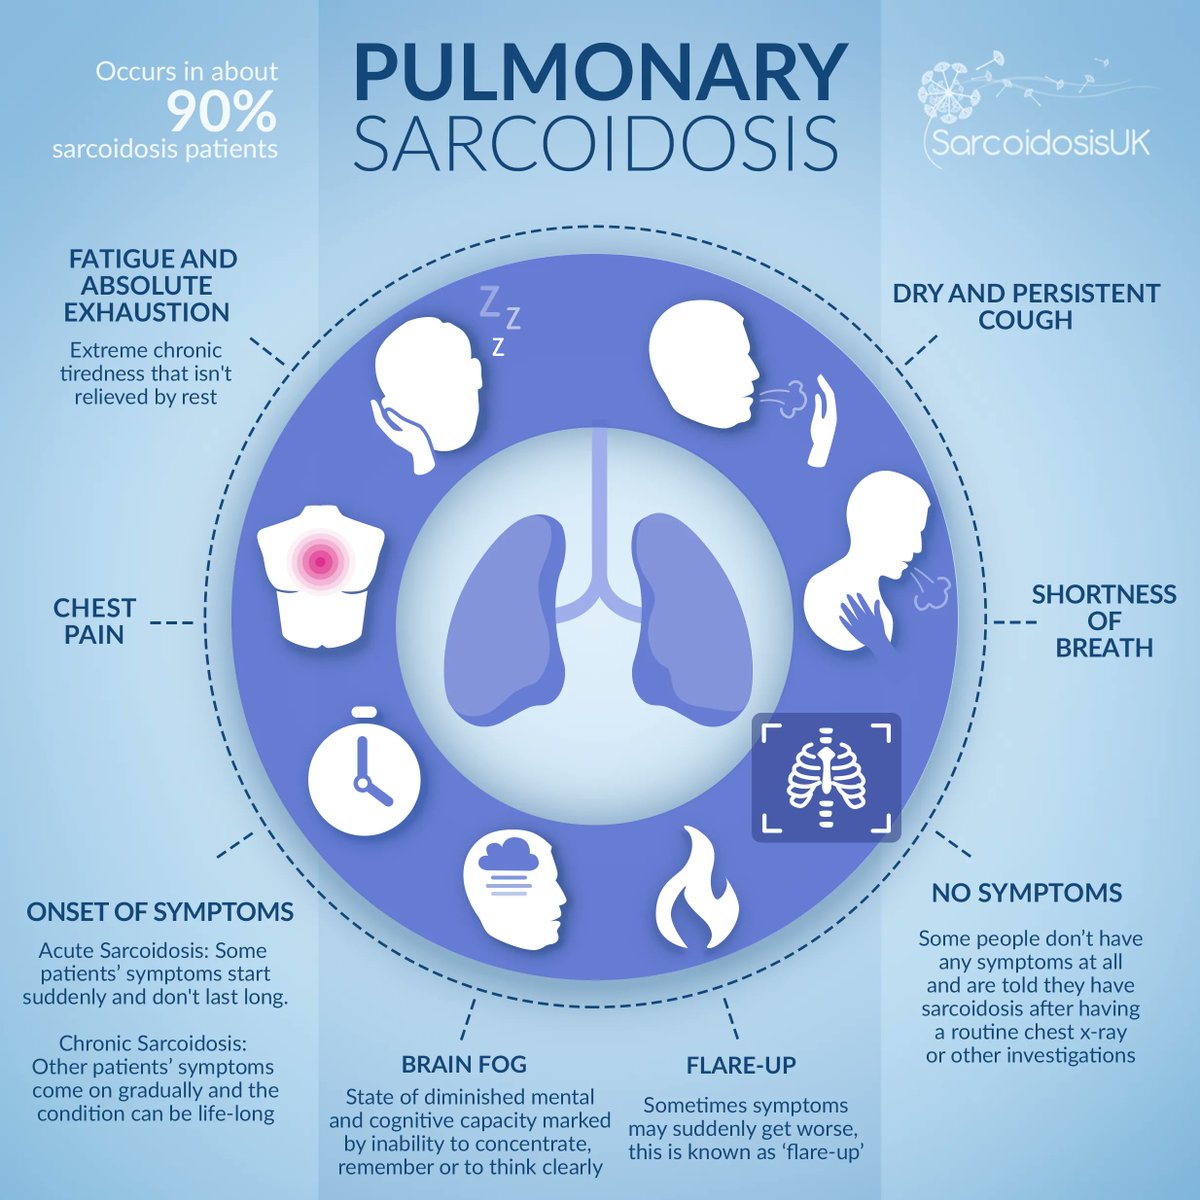 It's Day 2 of Small Charity Week! Pulmonary sarcoidosis occurs in around 90% of sarcoidosis patients. Sarcoidosis affects everyone differently, so you may have none, all, or some of these symptoms, or other symptoms that are not mentioned. buff.ly/3ACAJC3